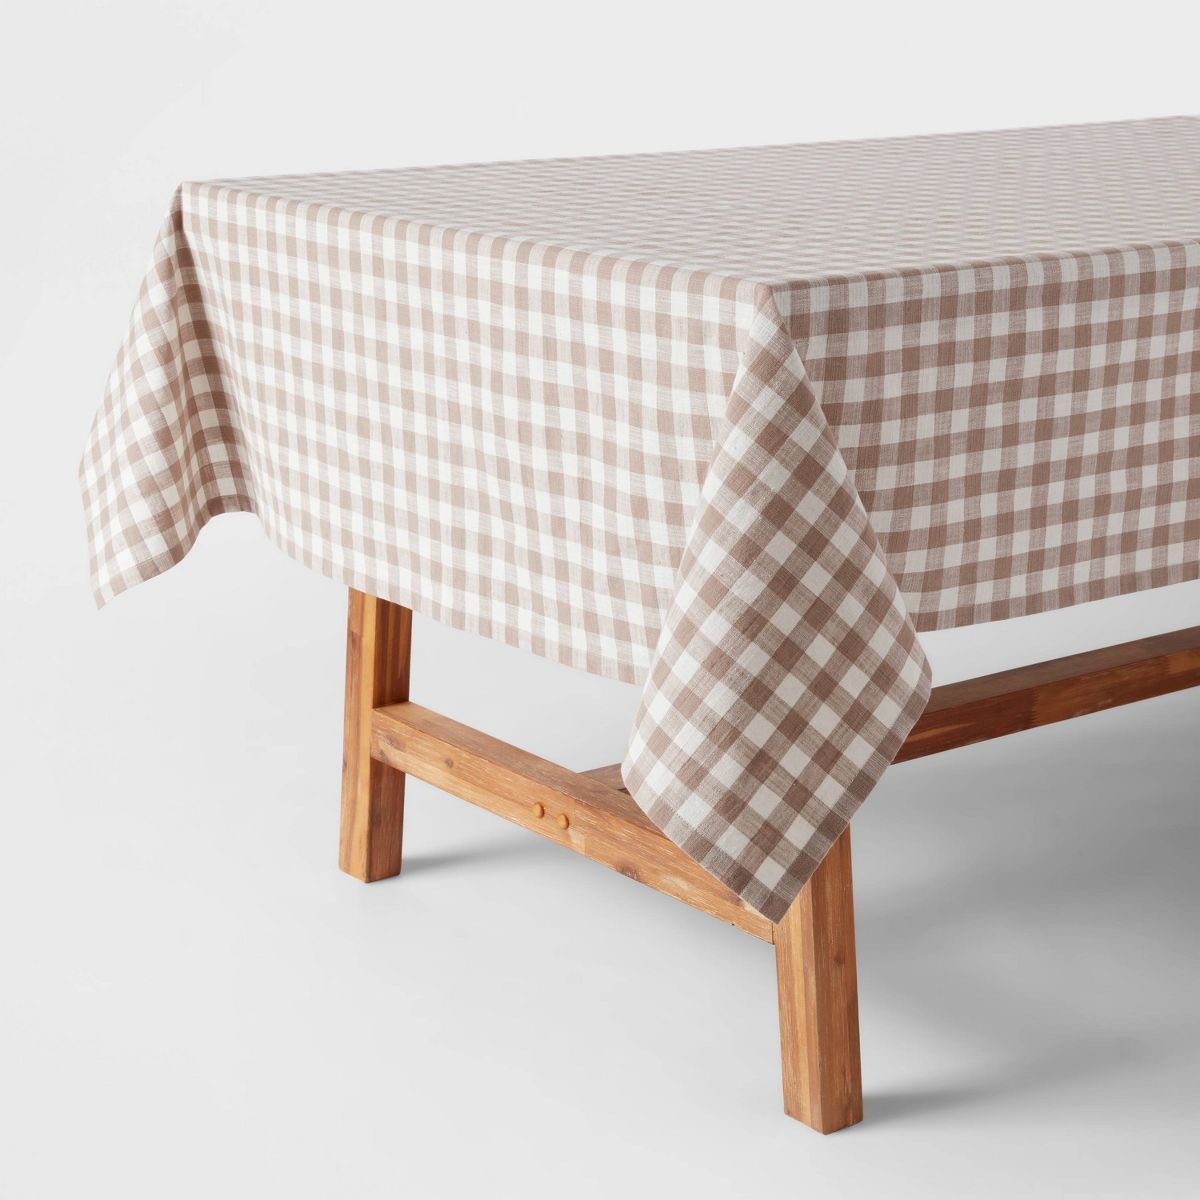 60" x 84" Cotton Gingham Tablecloth Taupe - Threshold™ | Target